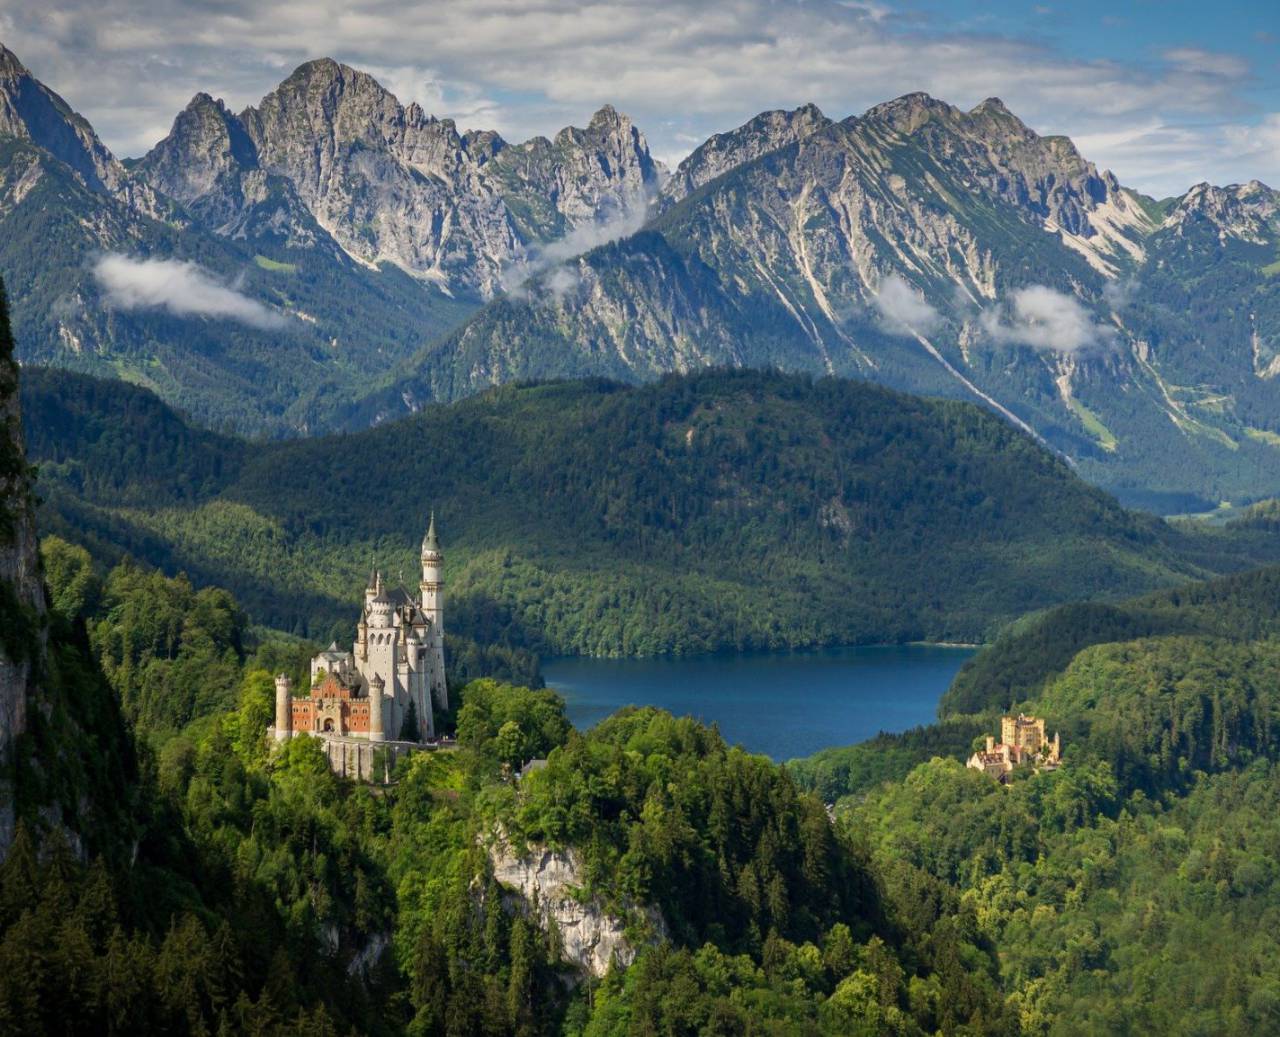 Neuschwanstein Castle and Hohenschwangau Castle with a view of the mountain scenery